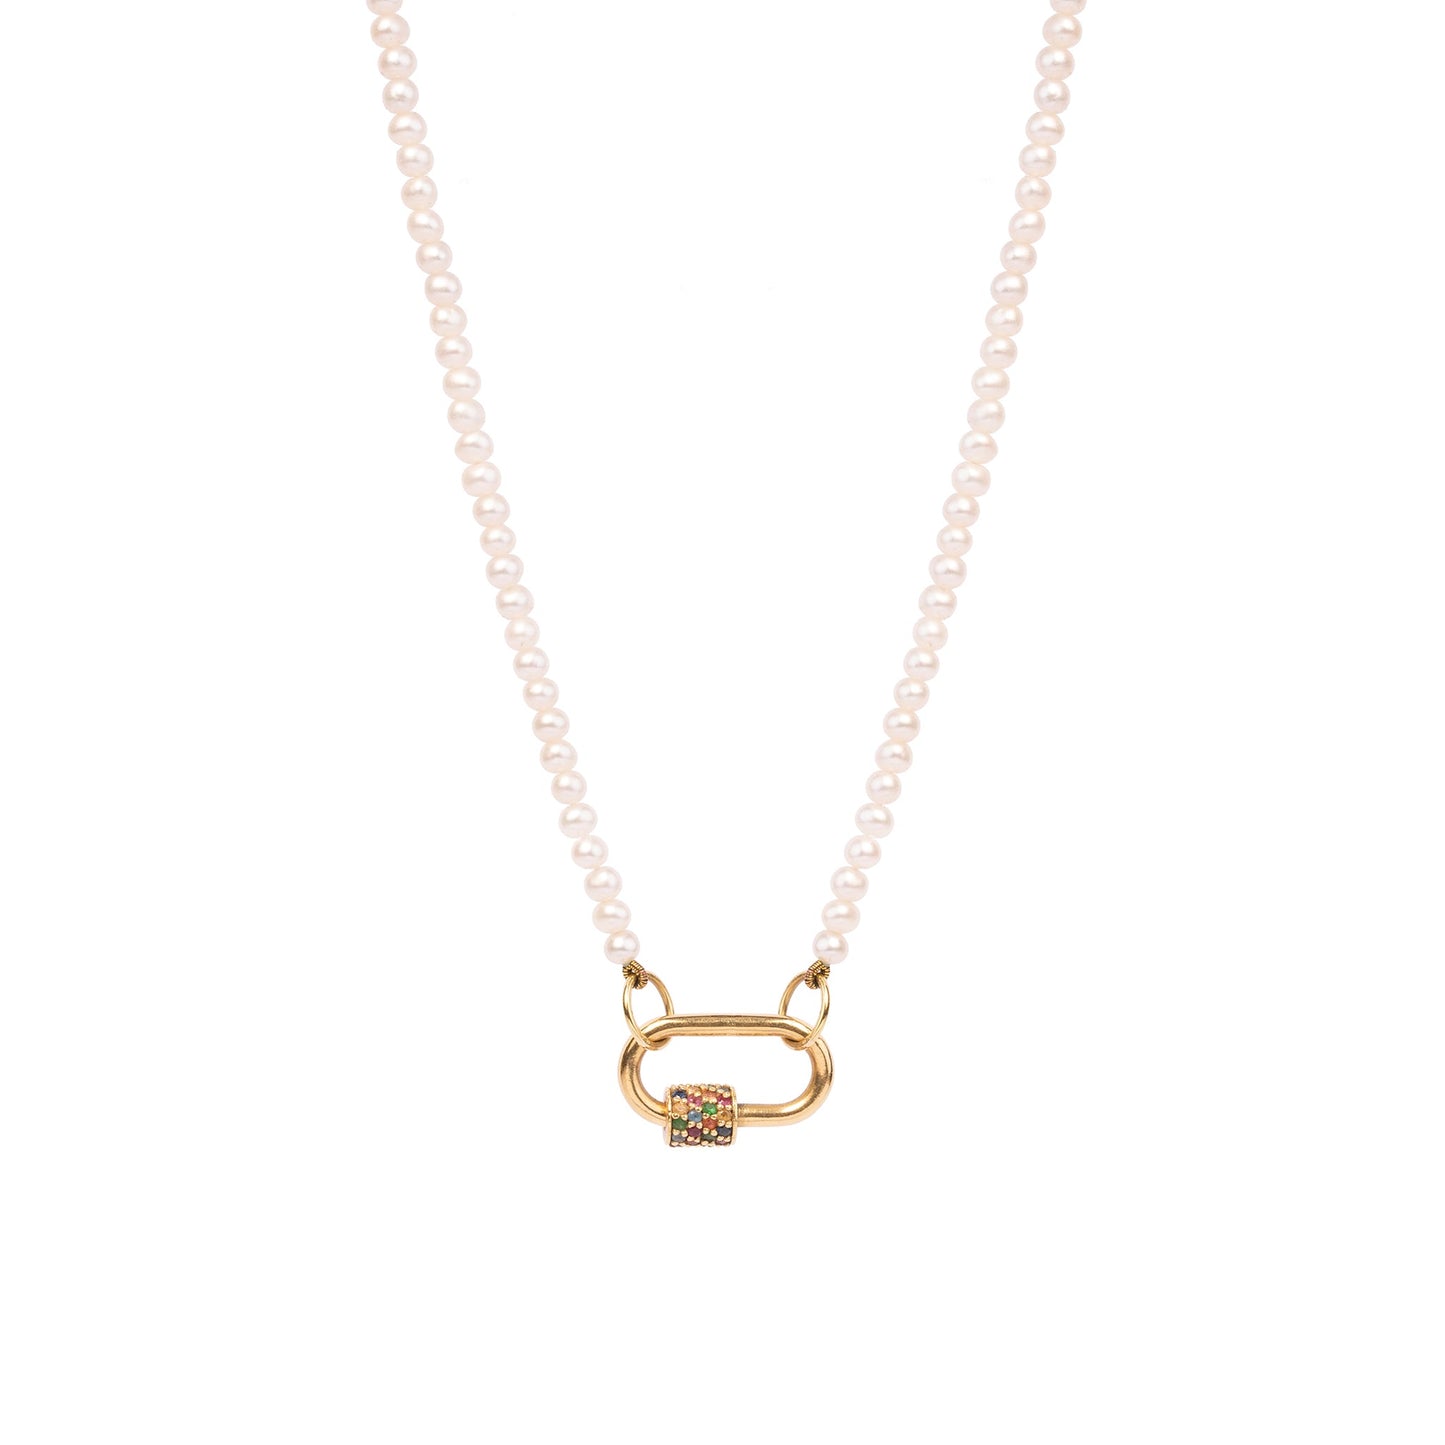 The Lock with a pearl chain - Oria.jewelry